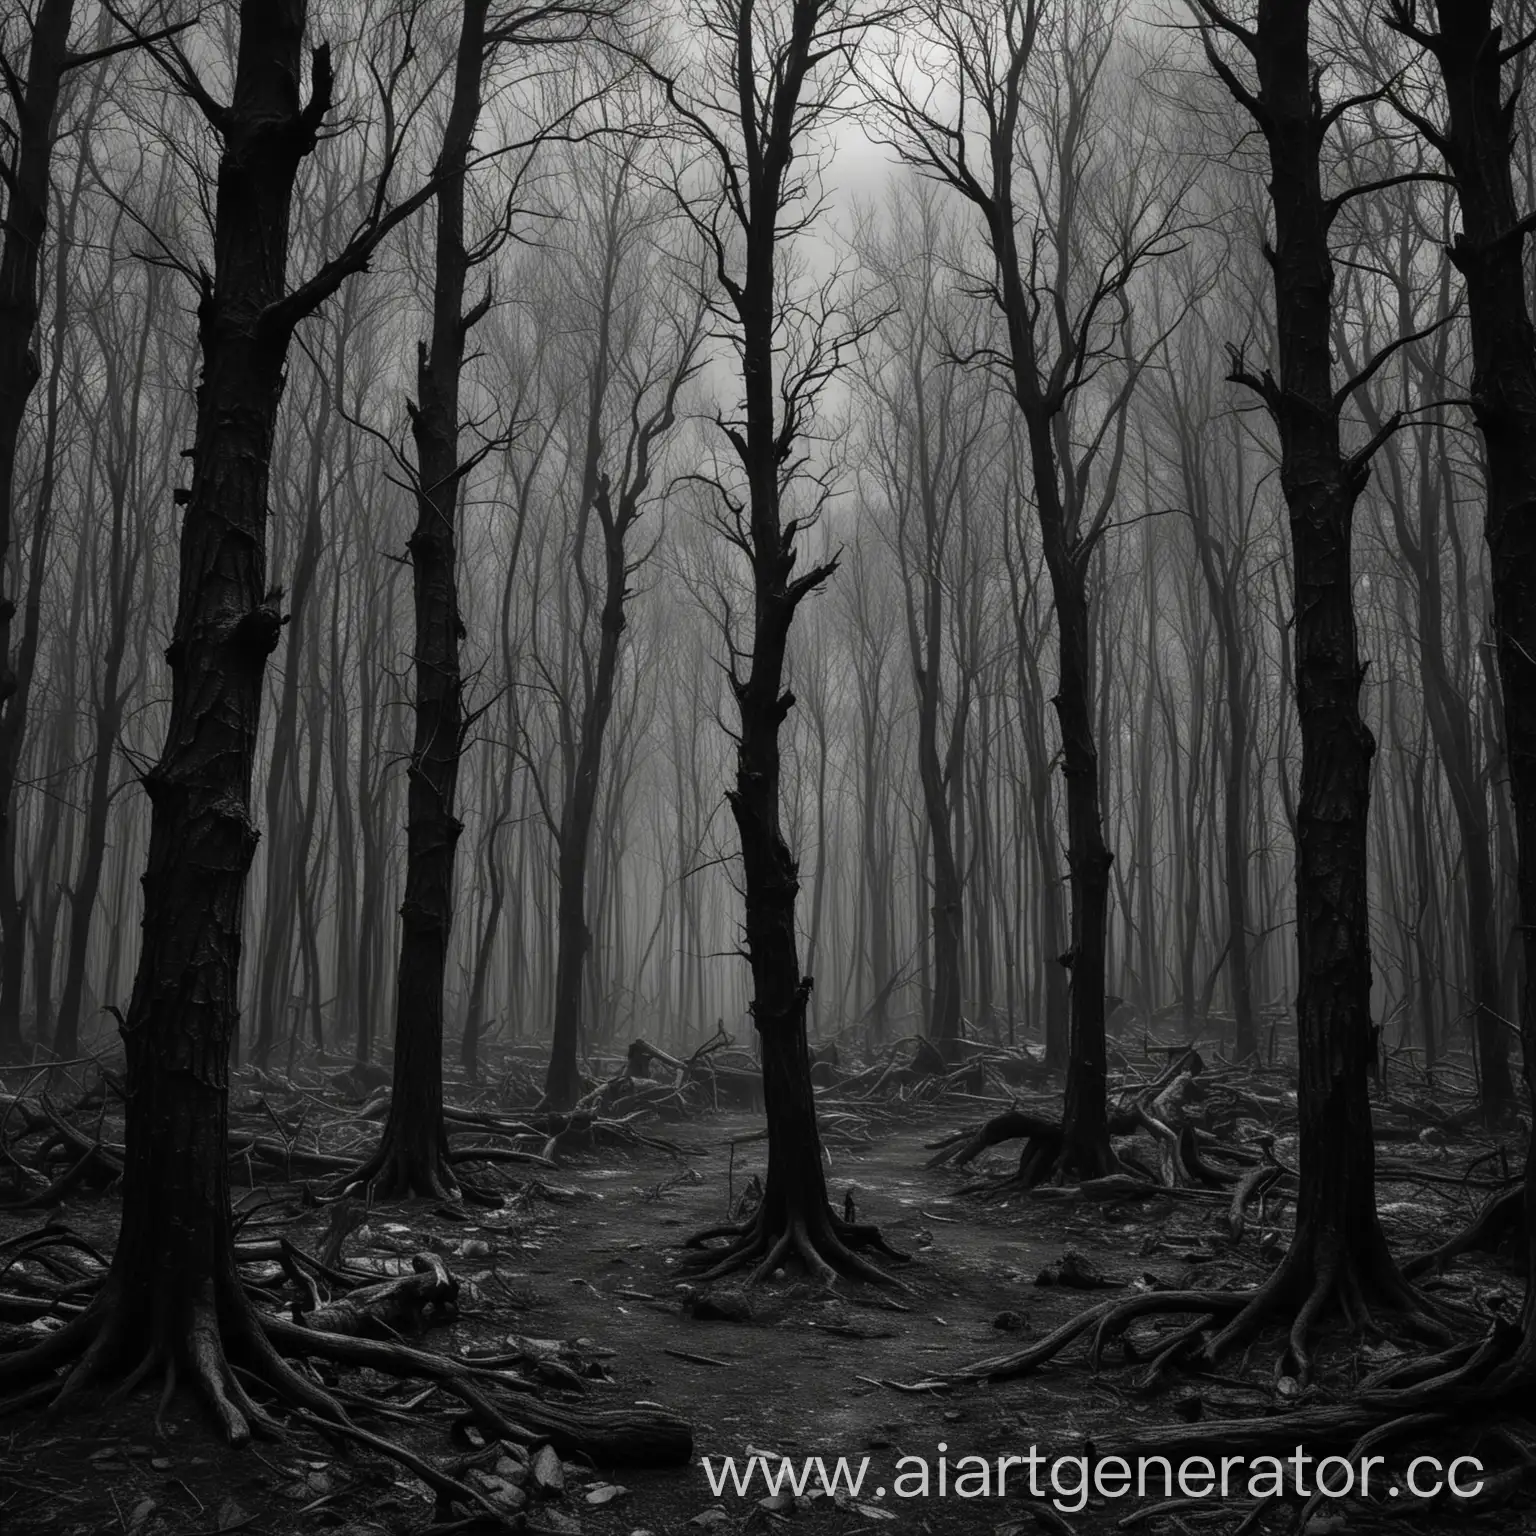 Eerie-Black-and-White-Landscape-with-Charred-Trees